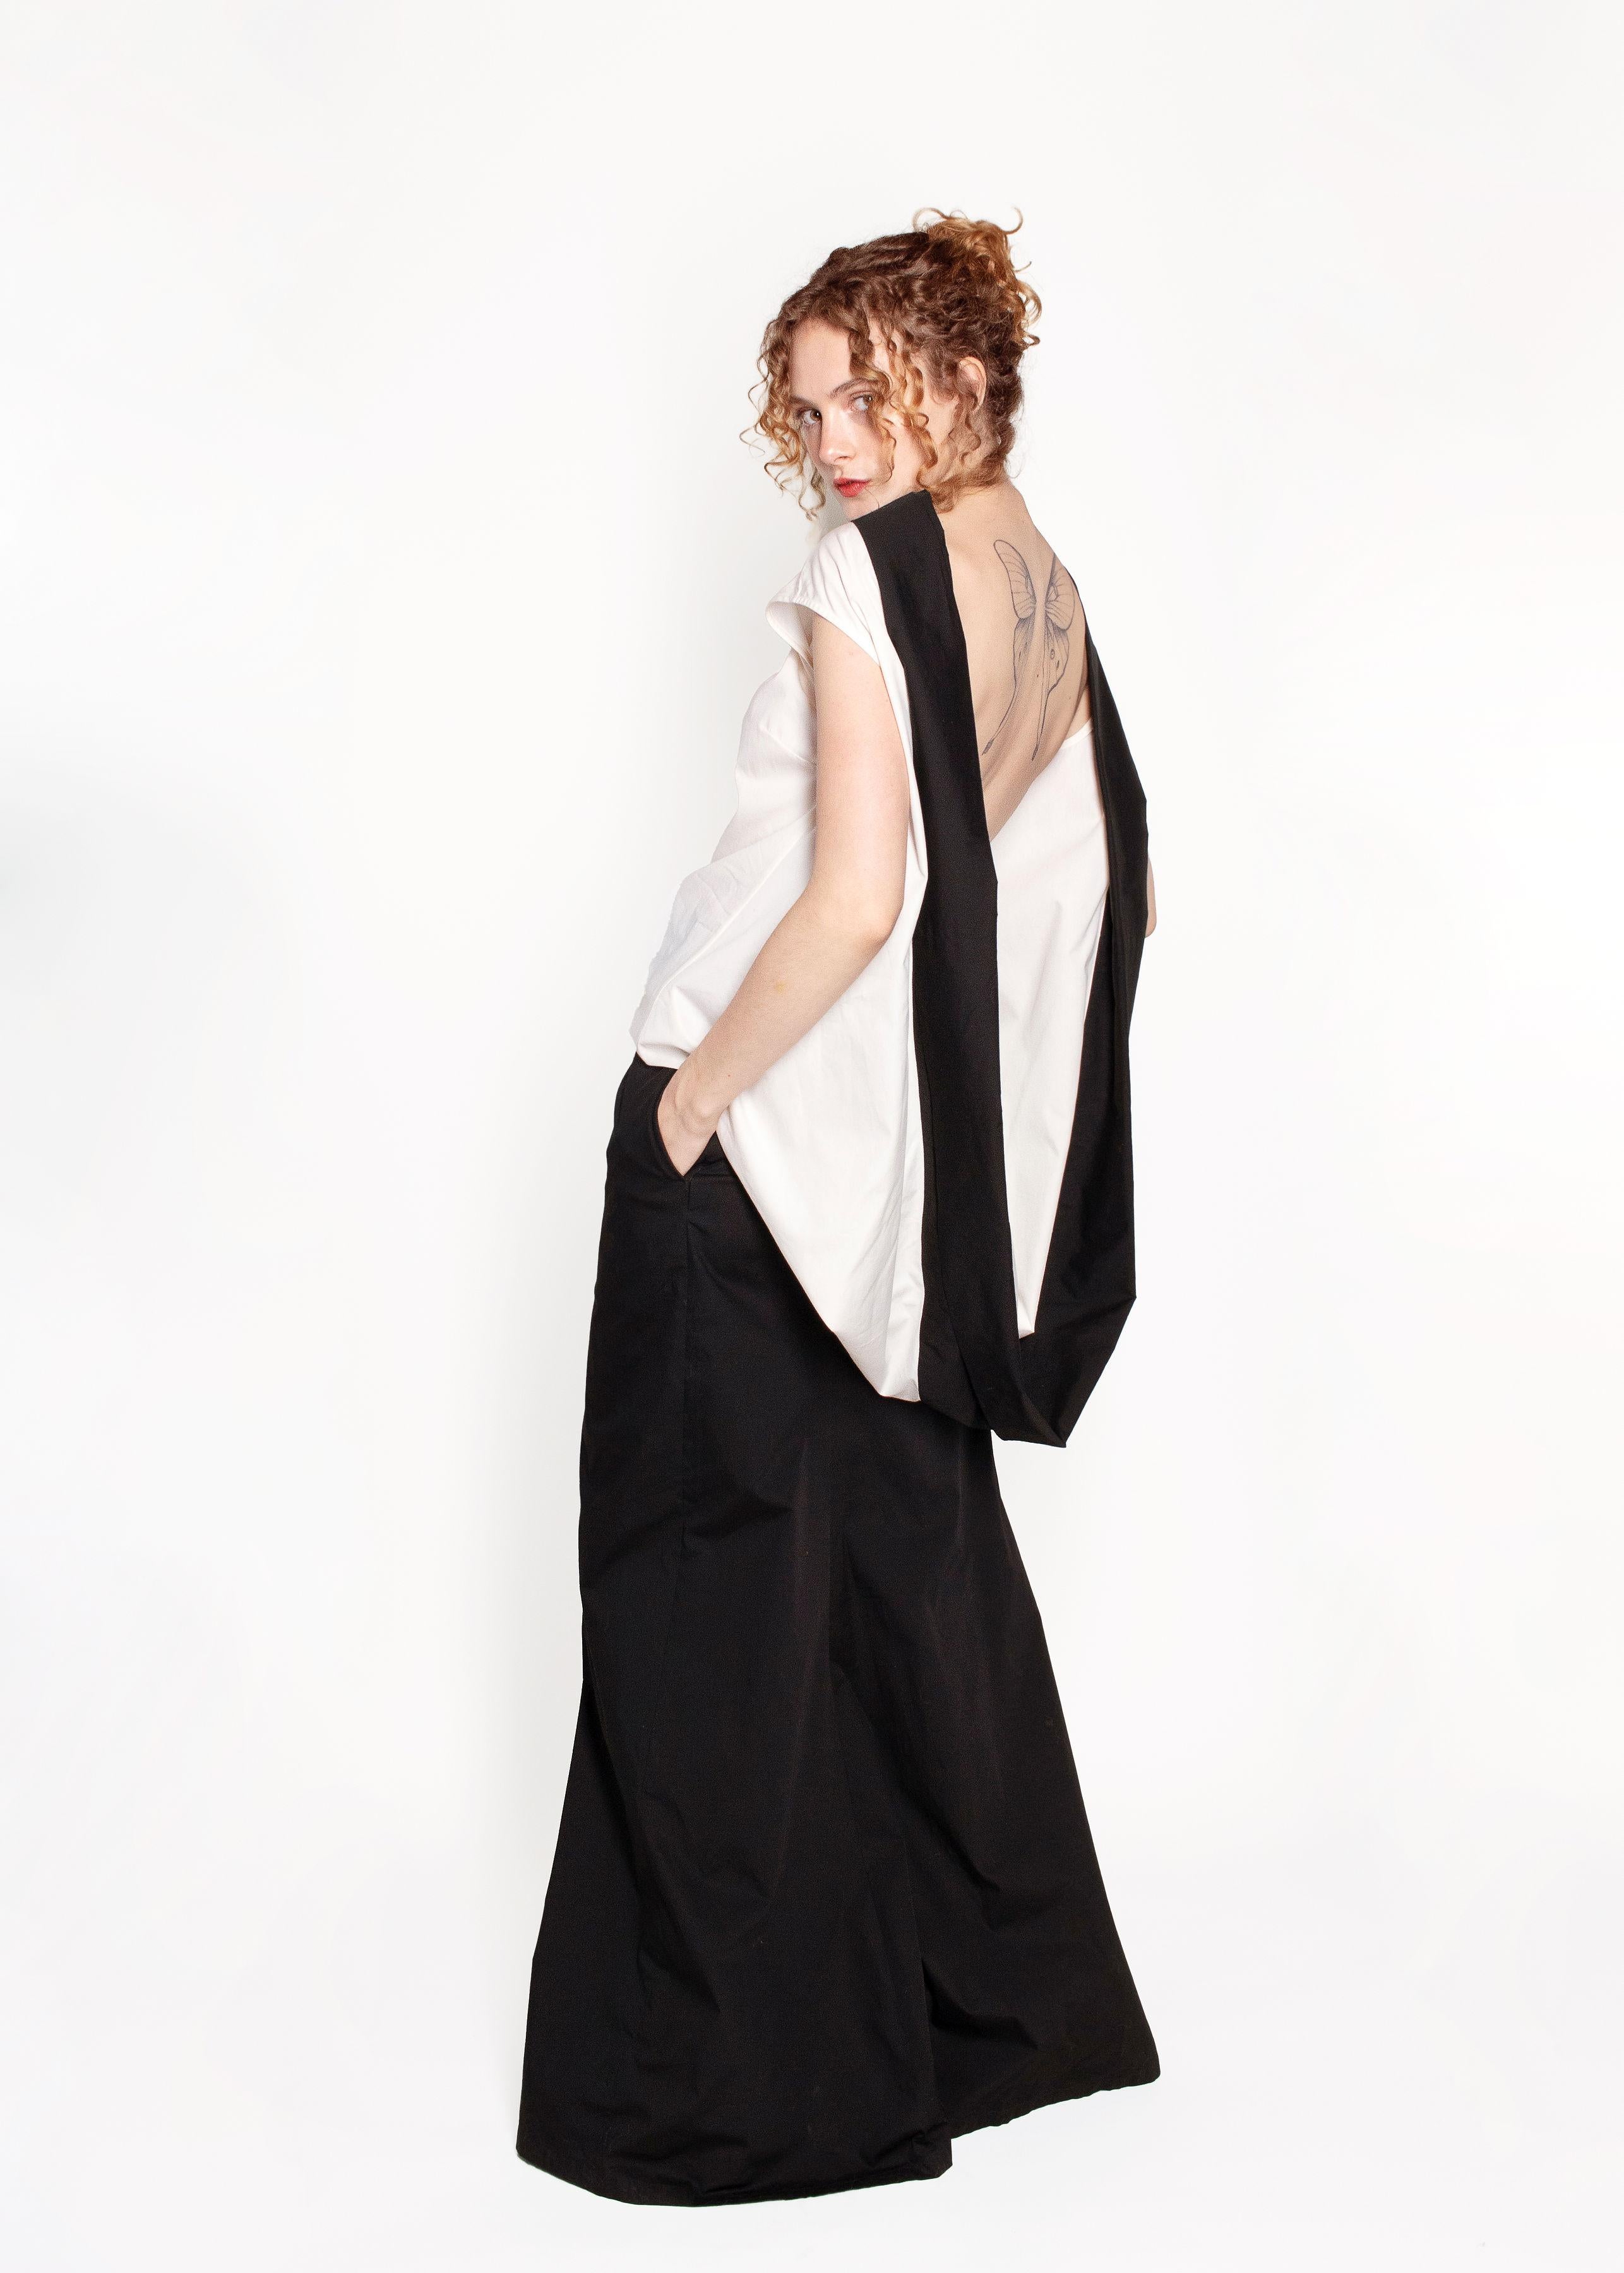 This Dries Van Noten Black/White Open Back Gown is perfect for evening occasions or special events. The open back and combination of black and white colors provide an eye-catching look that will make you stand out. The sleek and elegant design